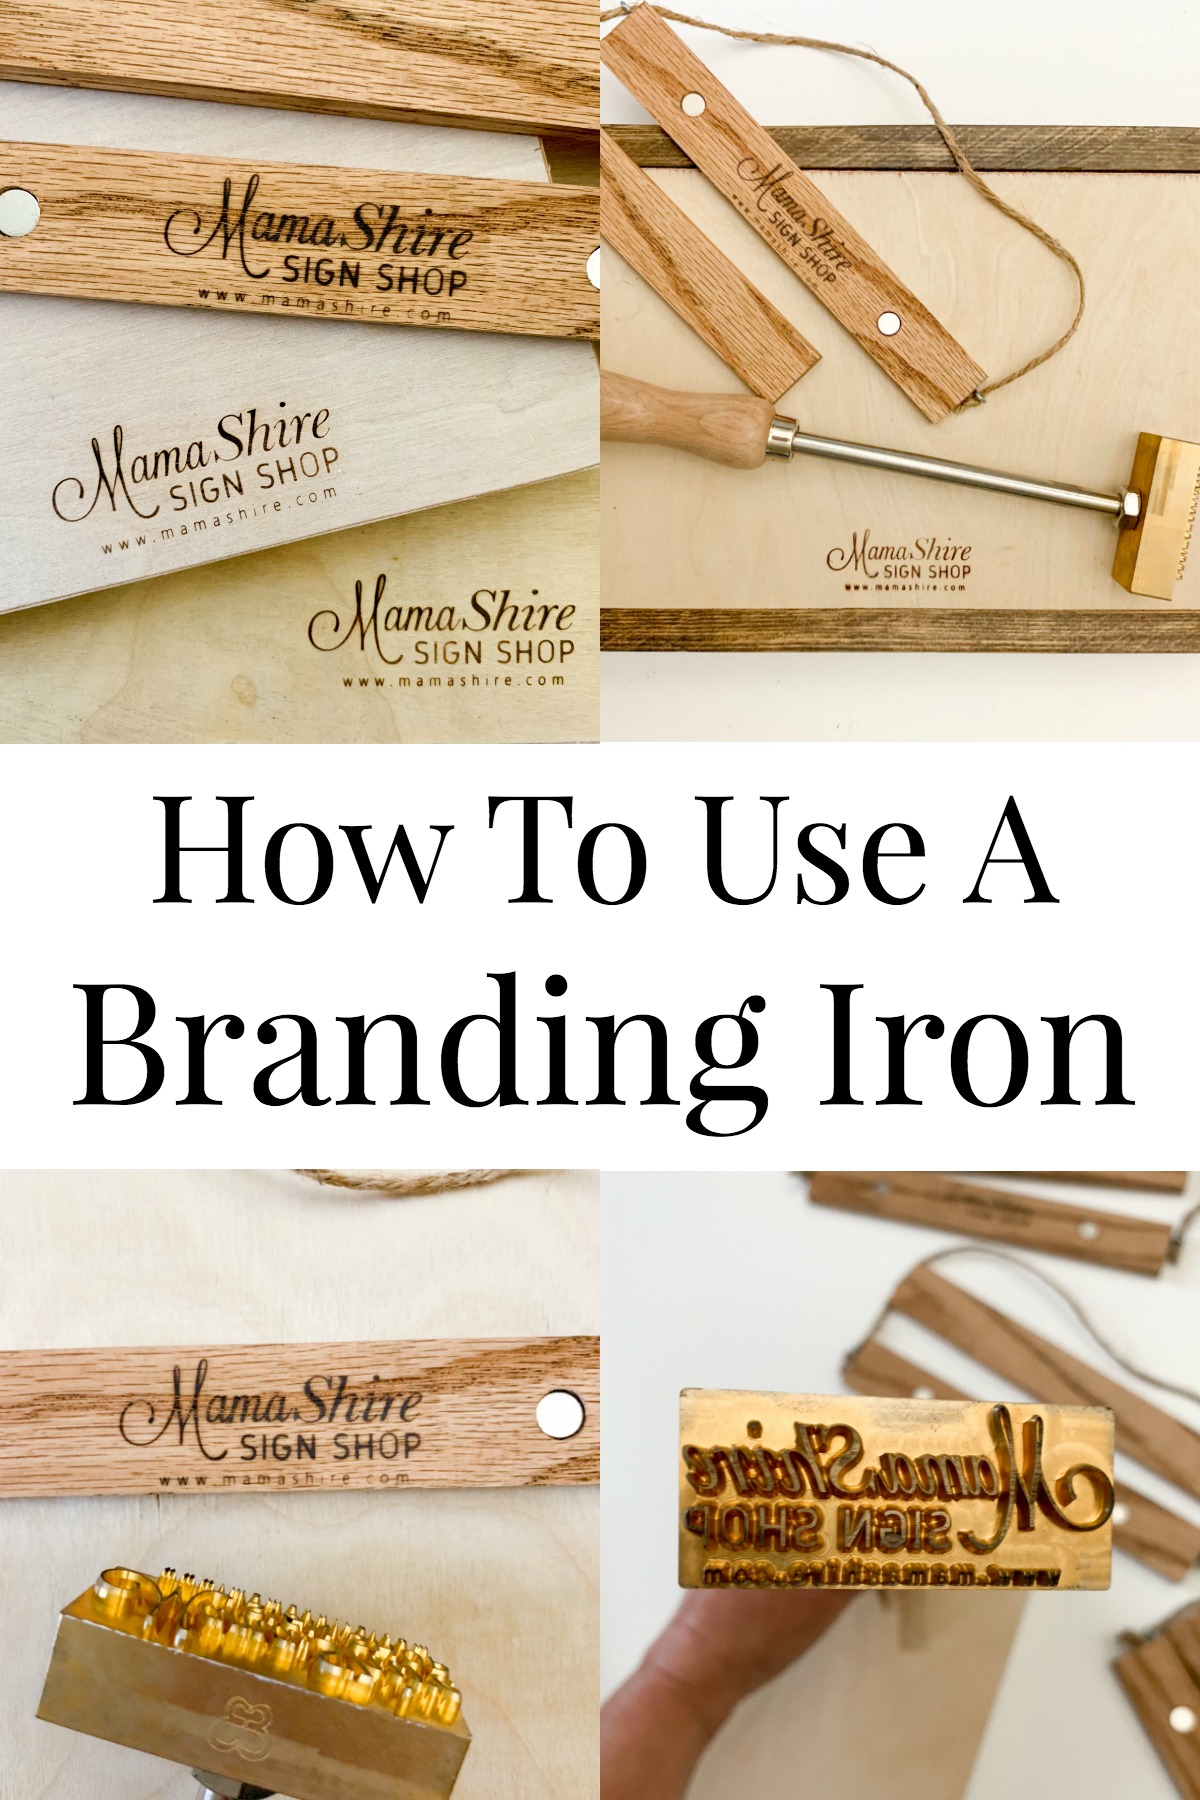 How to use a branding iron